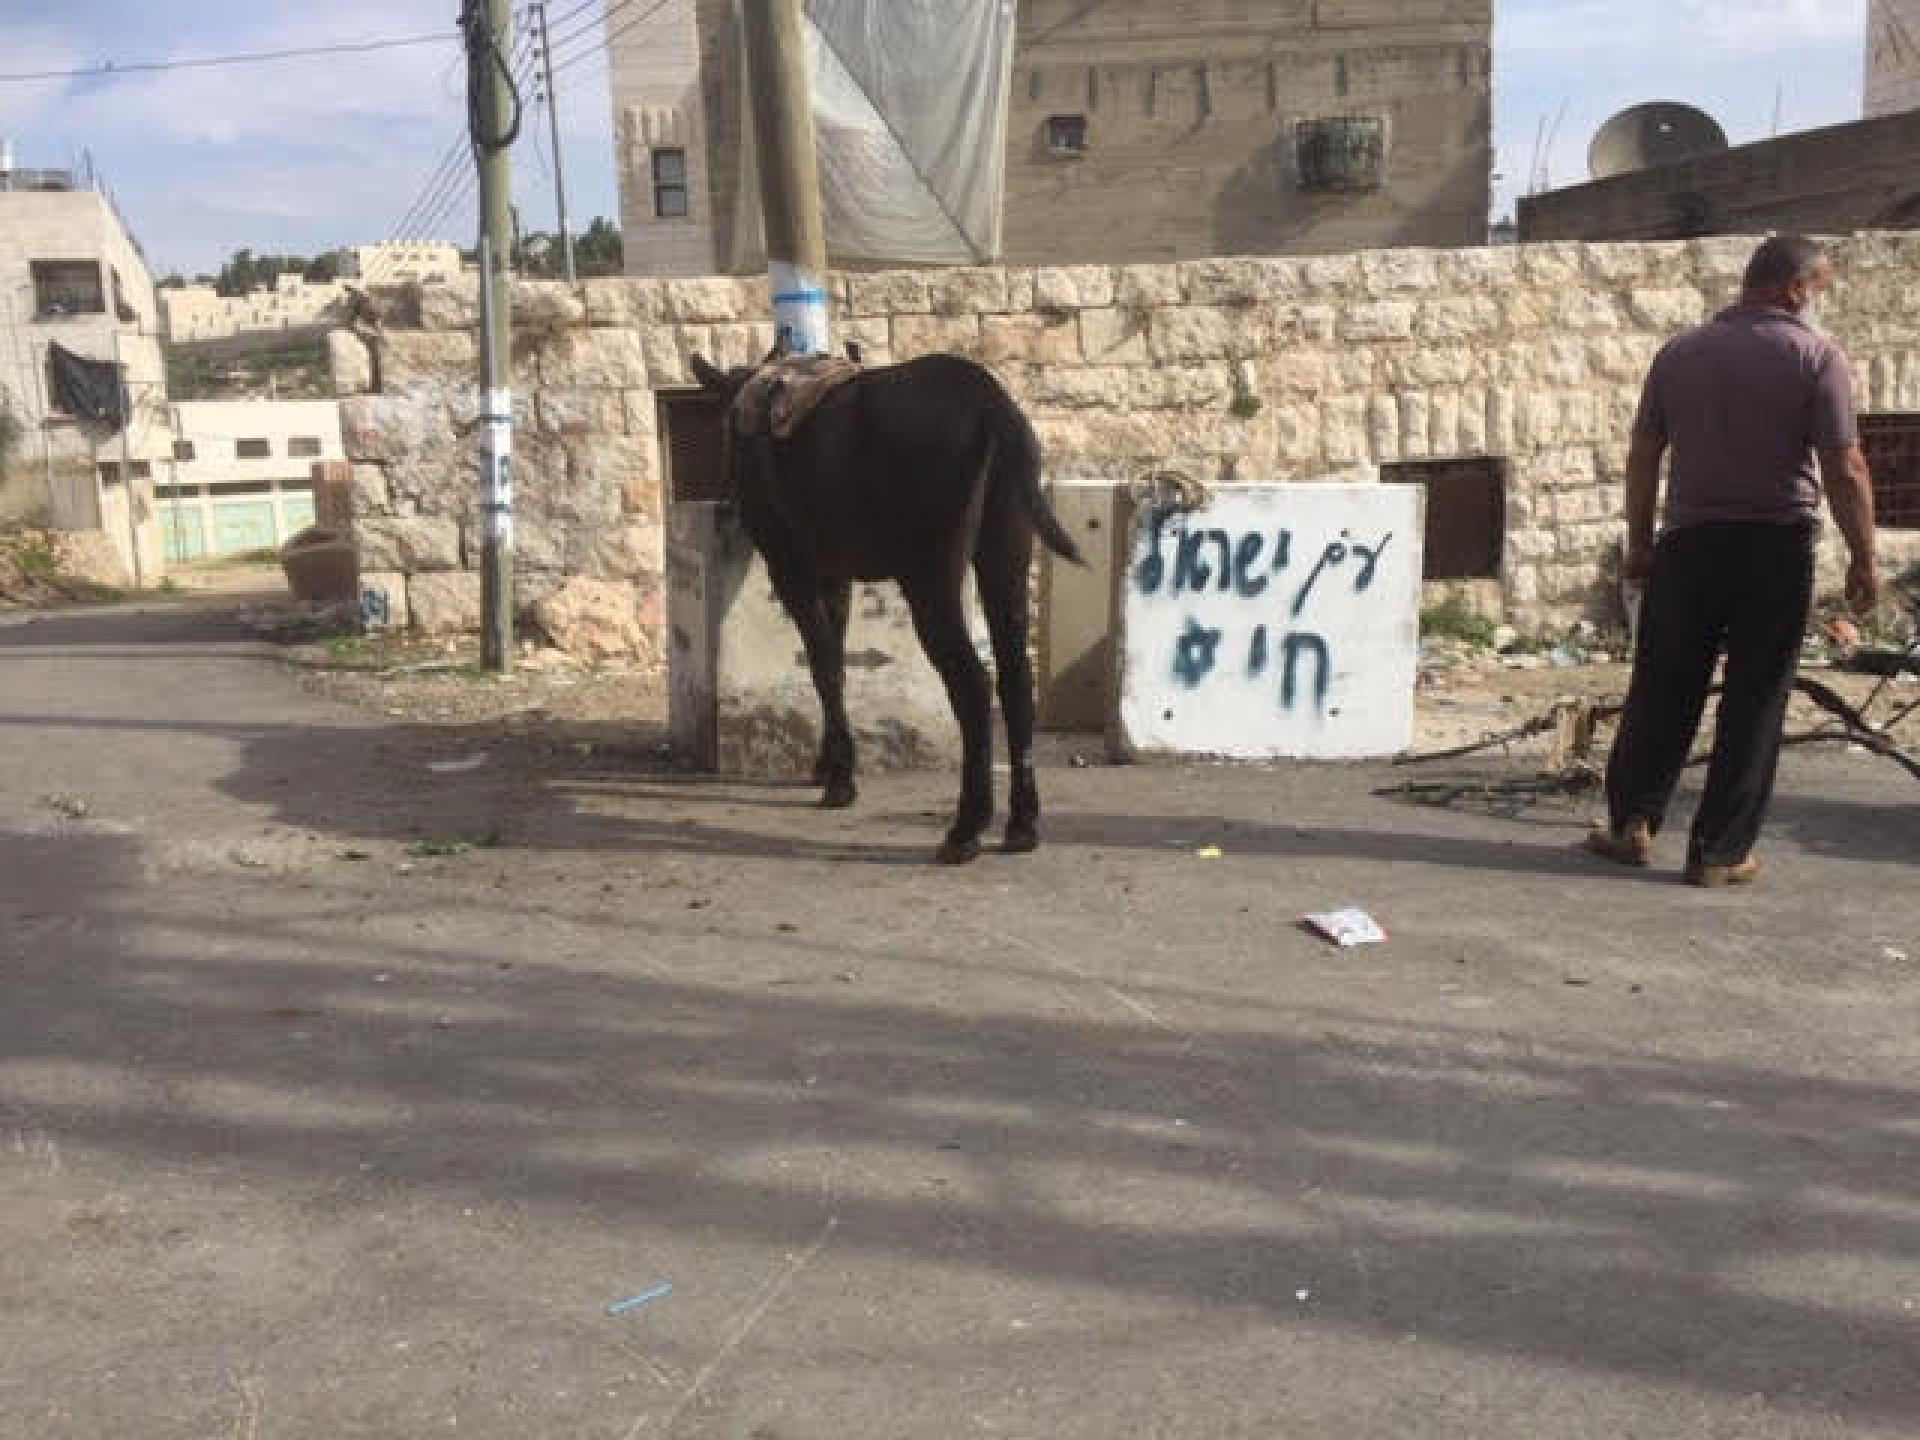 The grafitti The People of Israe live and the Palestinian with his broken cart